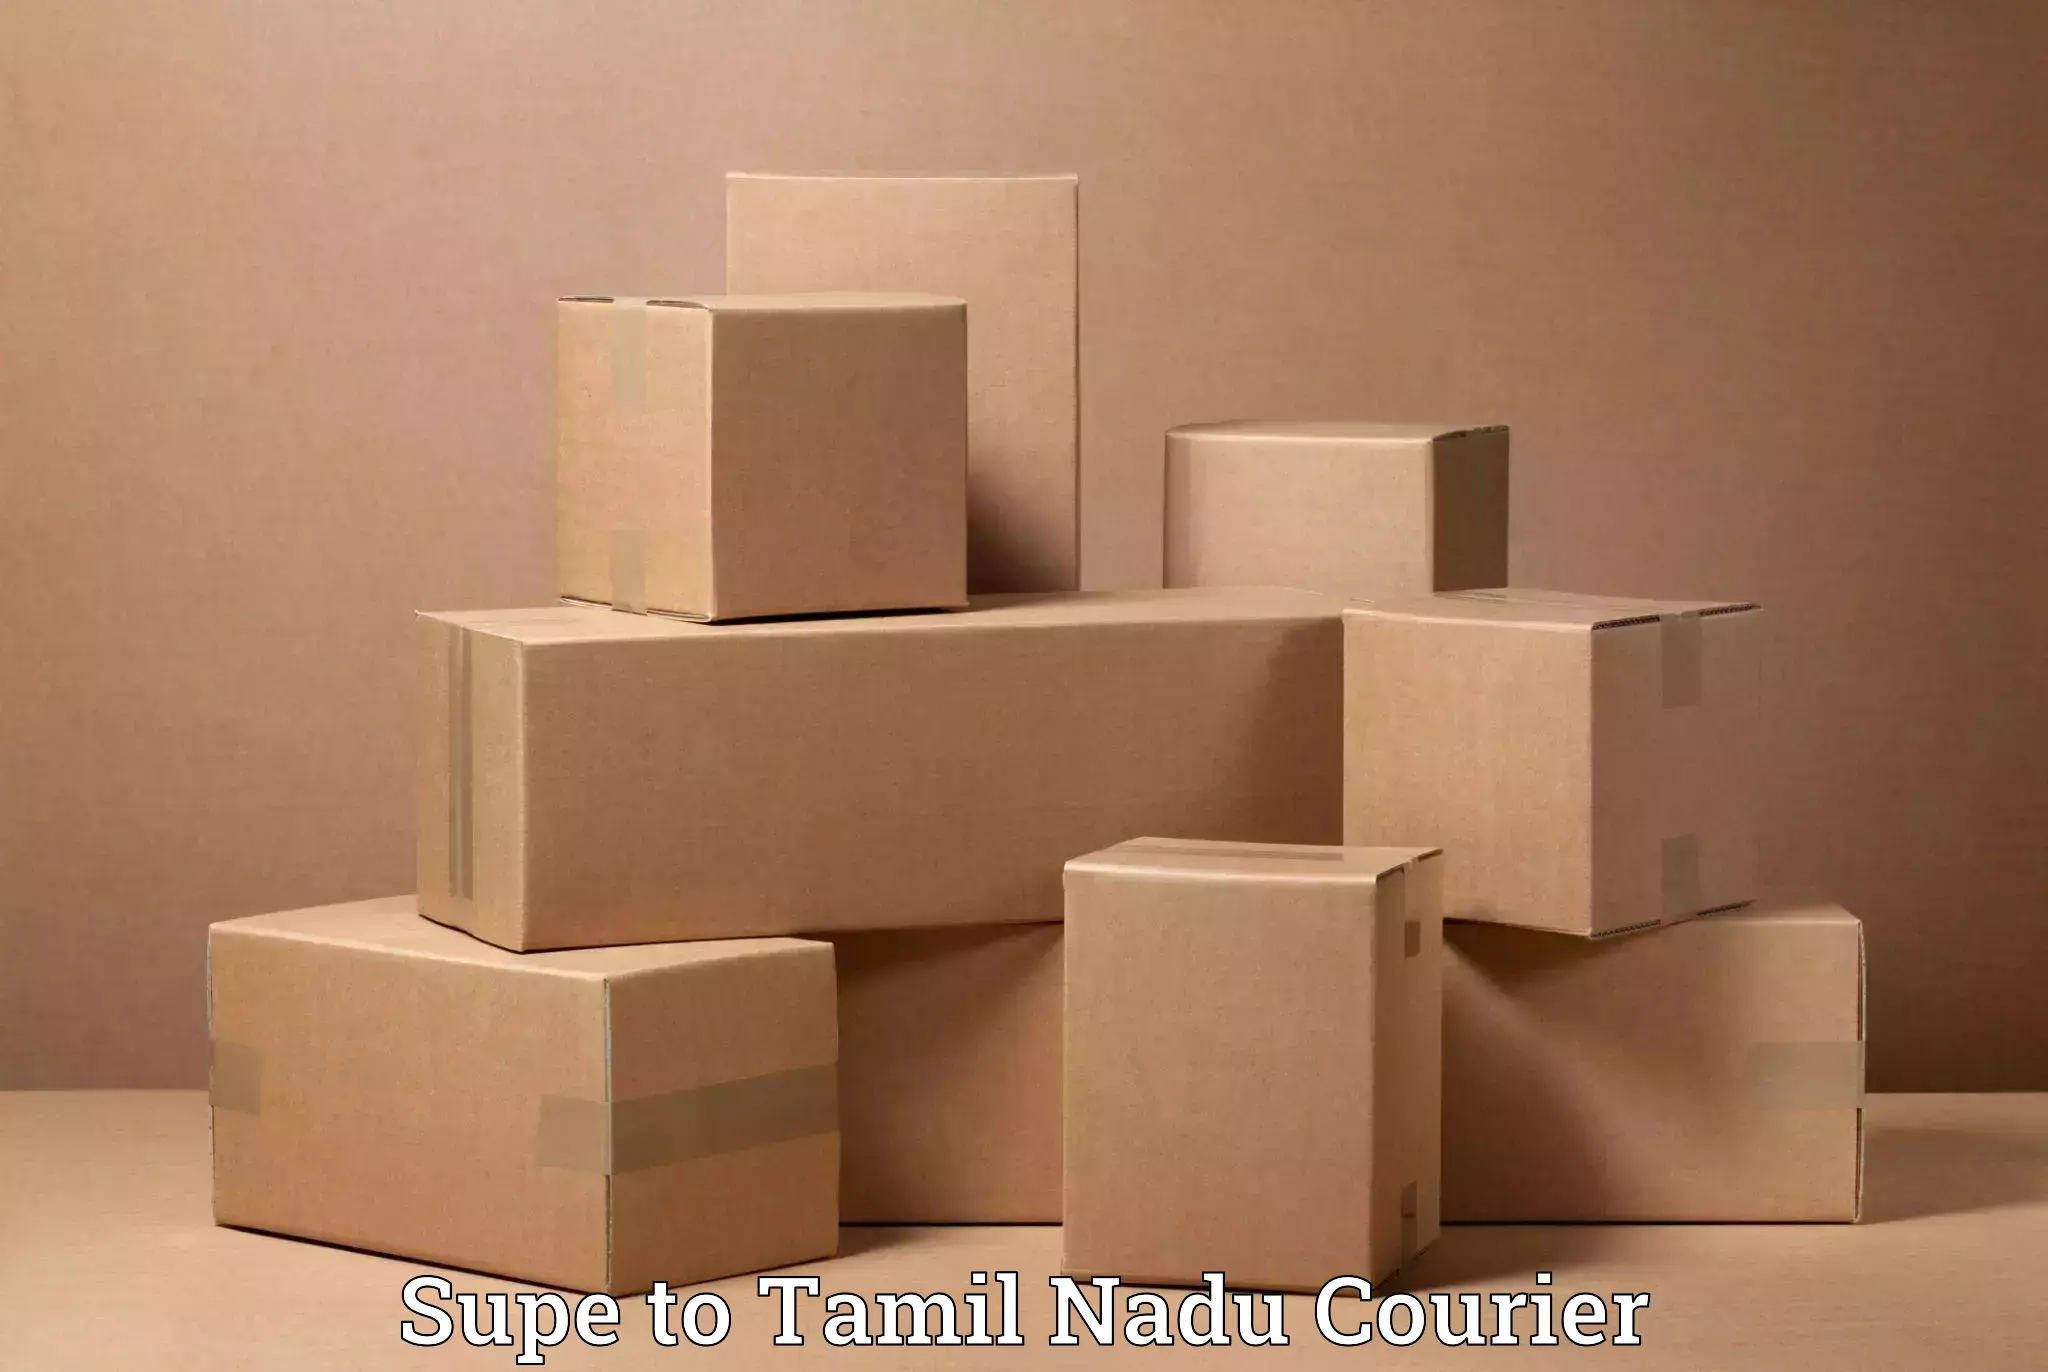 Furniture relocation services Supe to Rathinasabapathy Puram